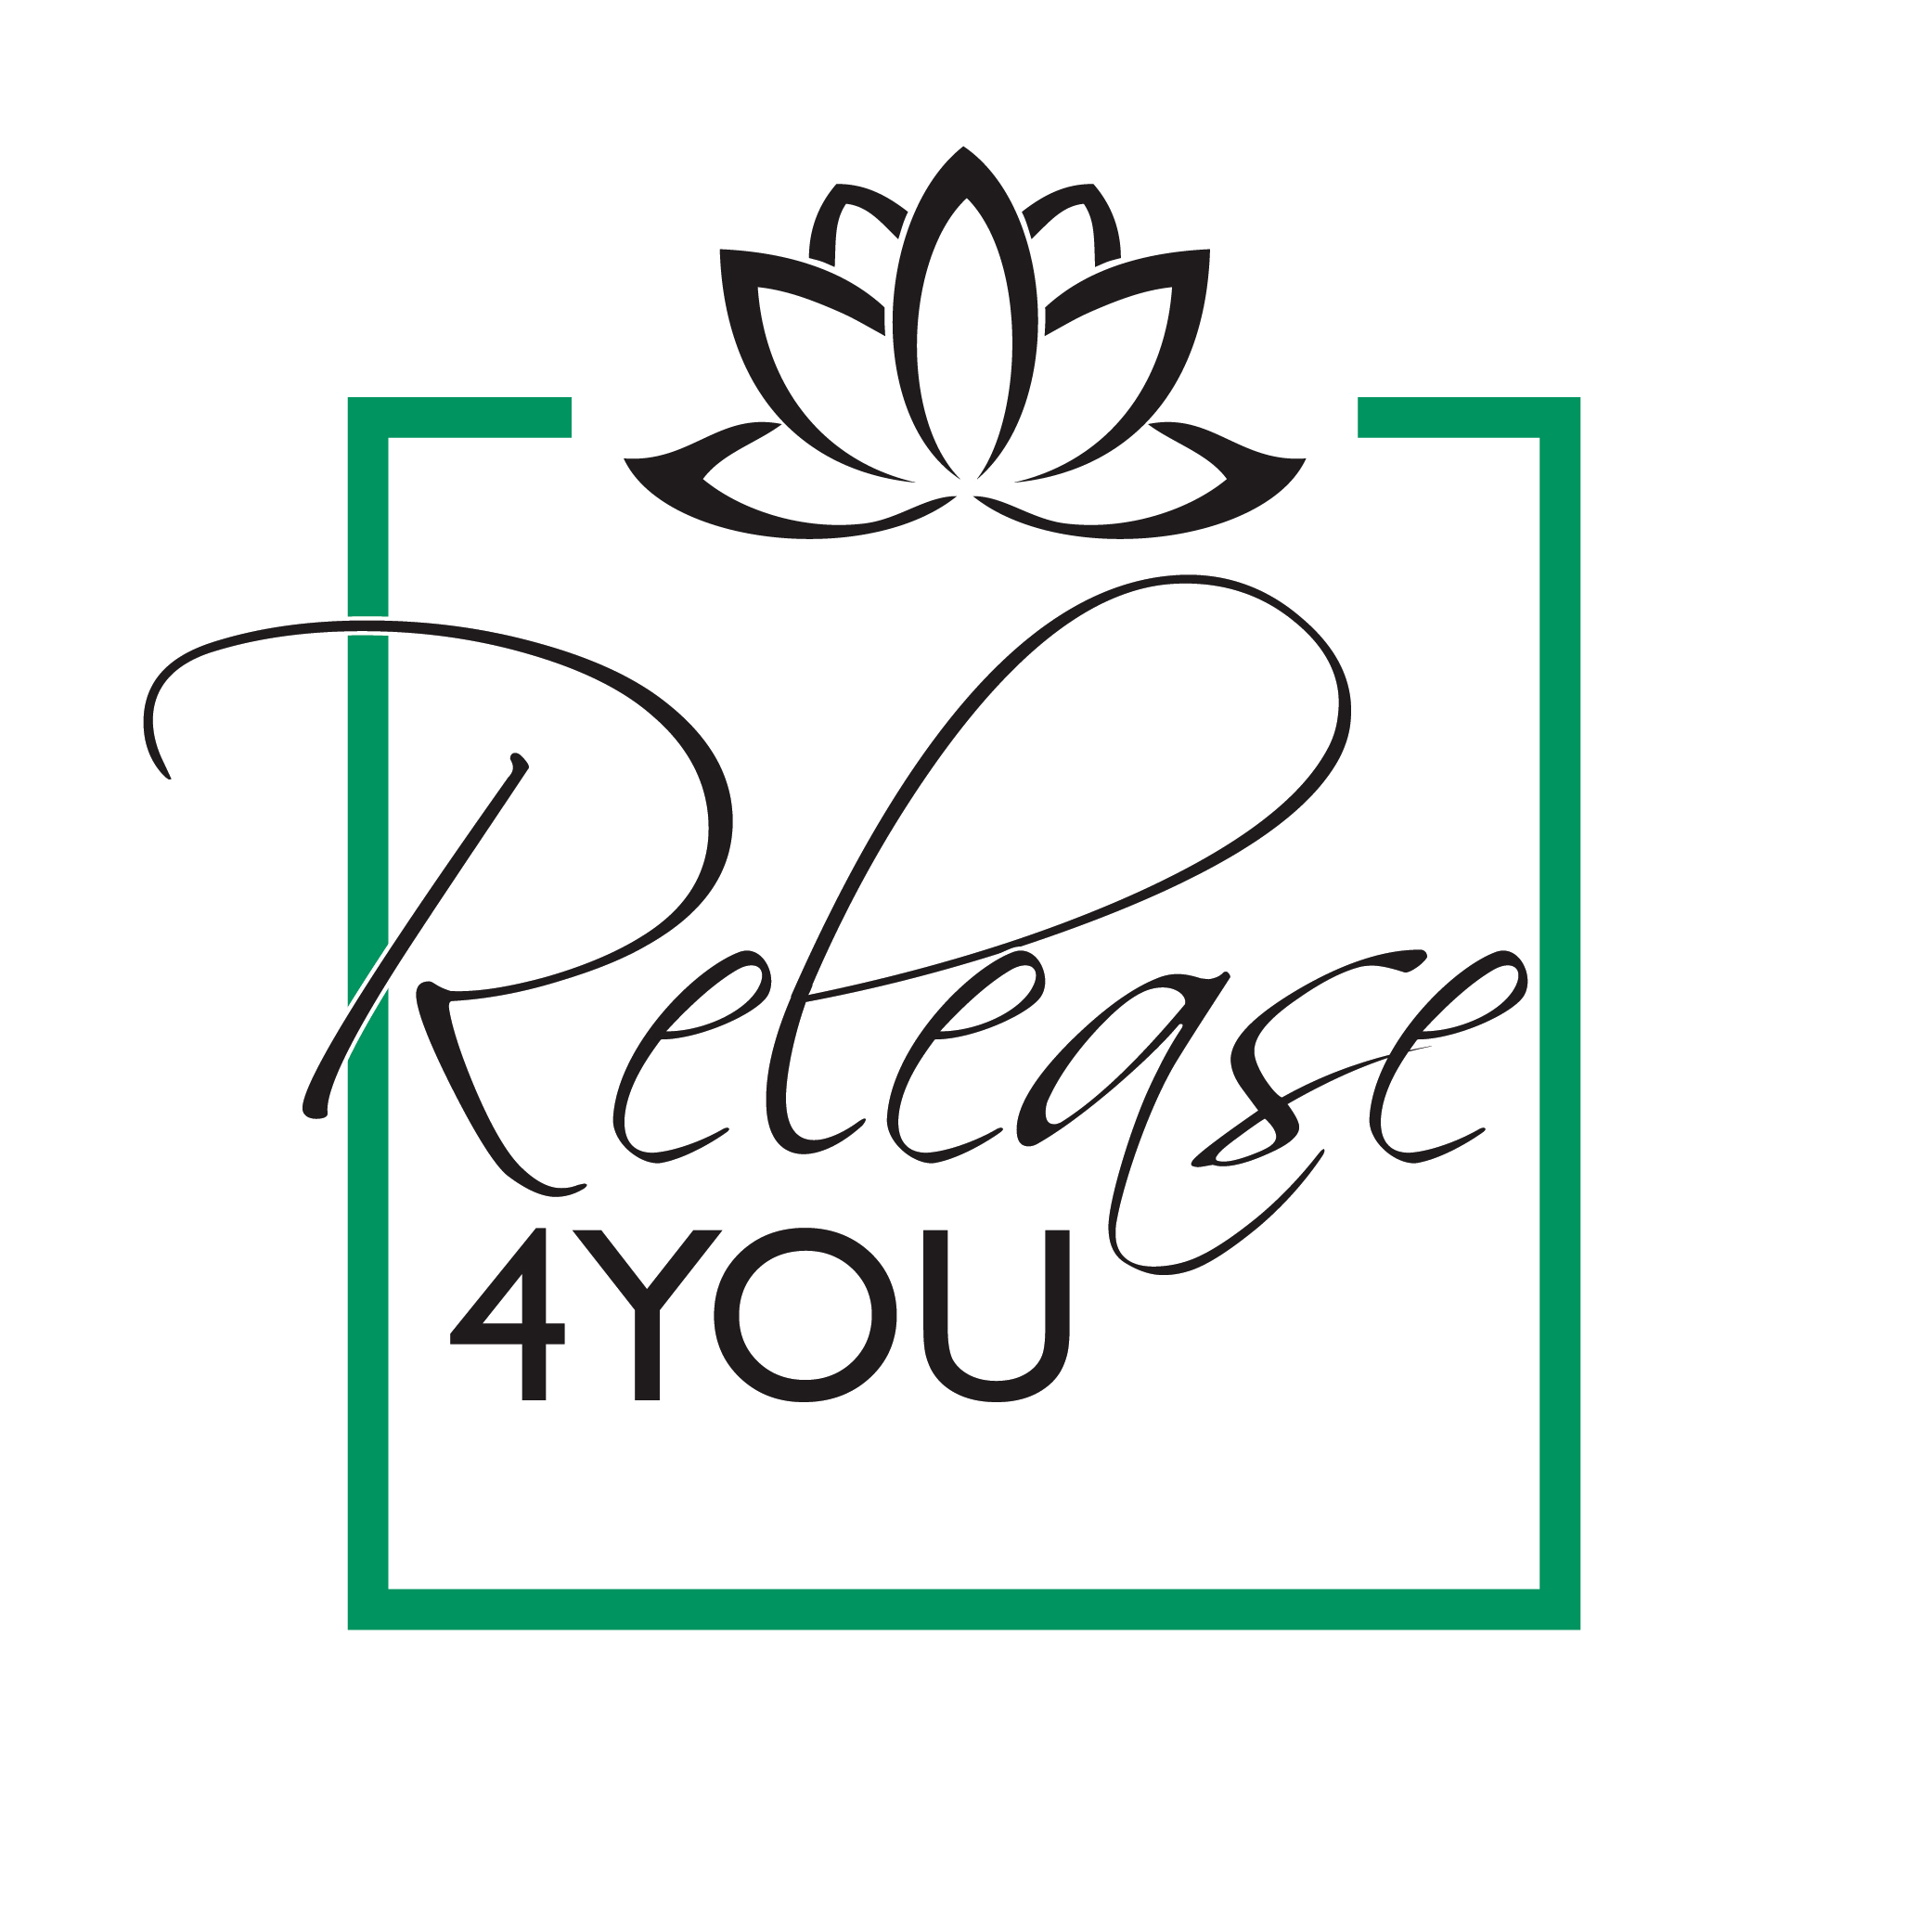 Release 4 You Academy